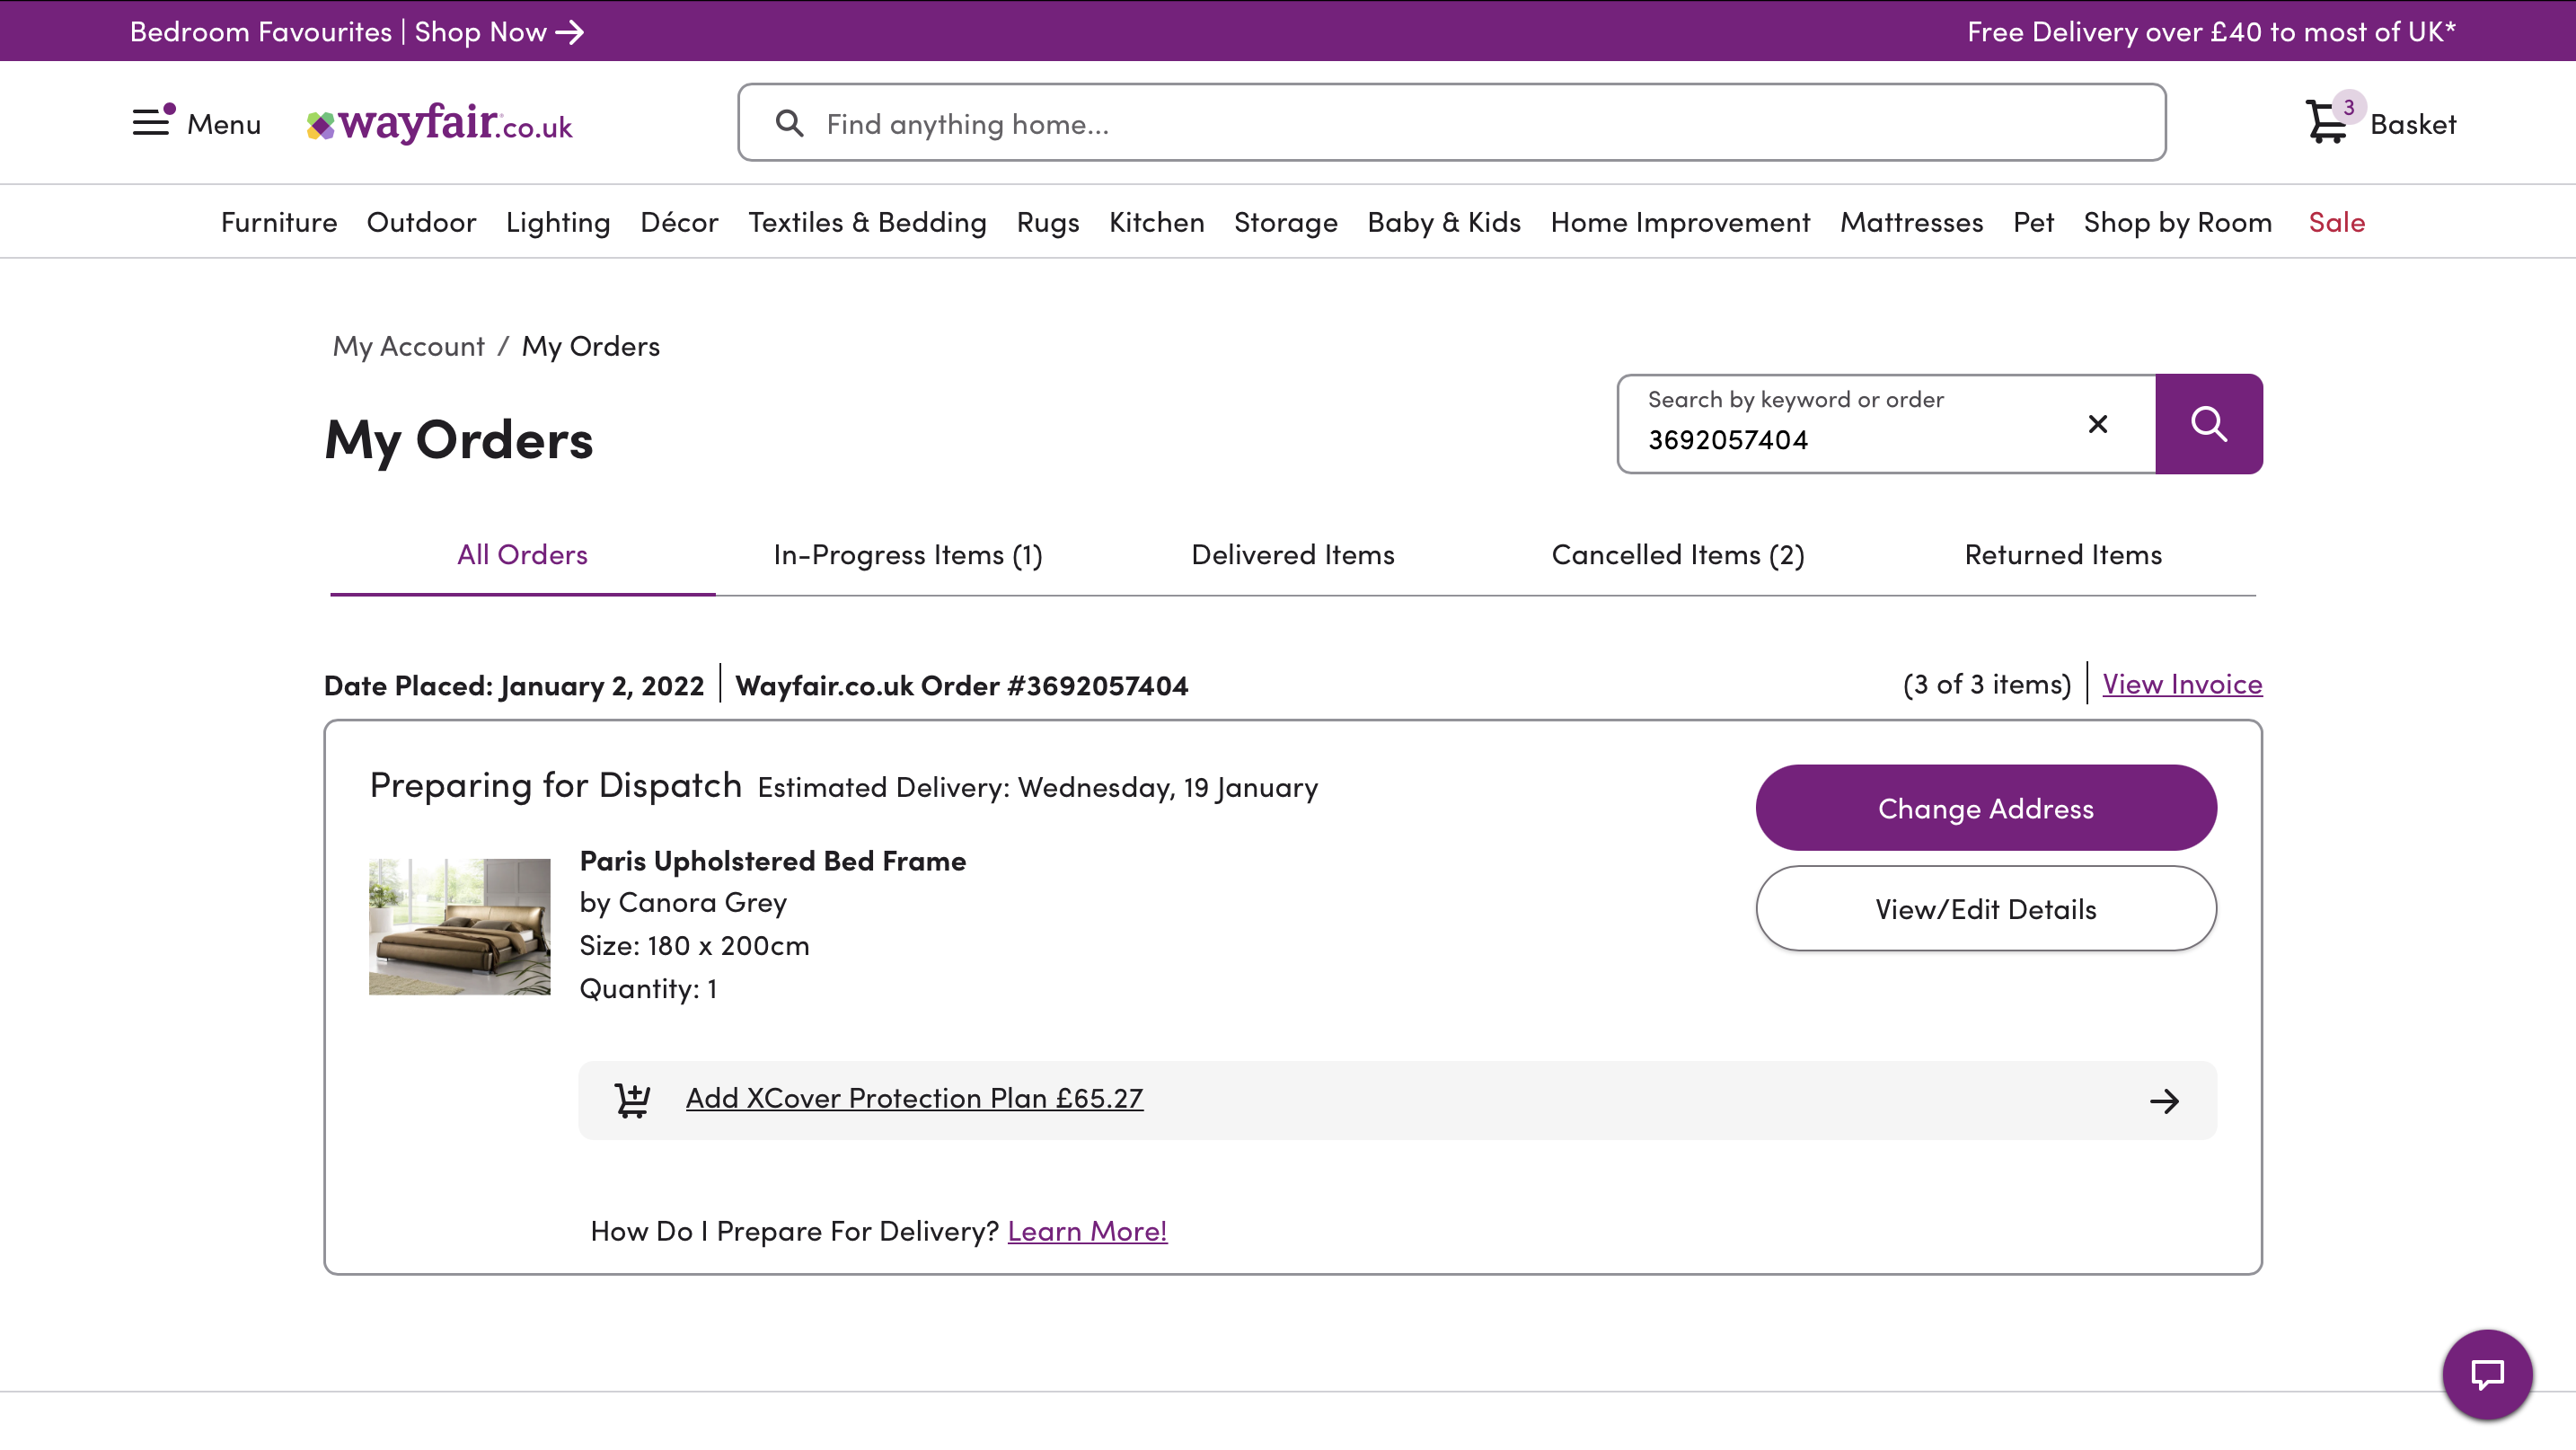 Wayfair.co.uk complaint I was out of pocket to the assembly company on Wayfair's advice